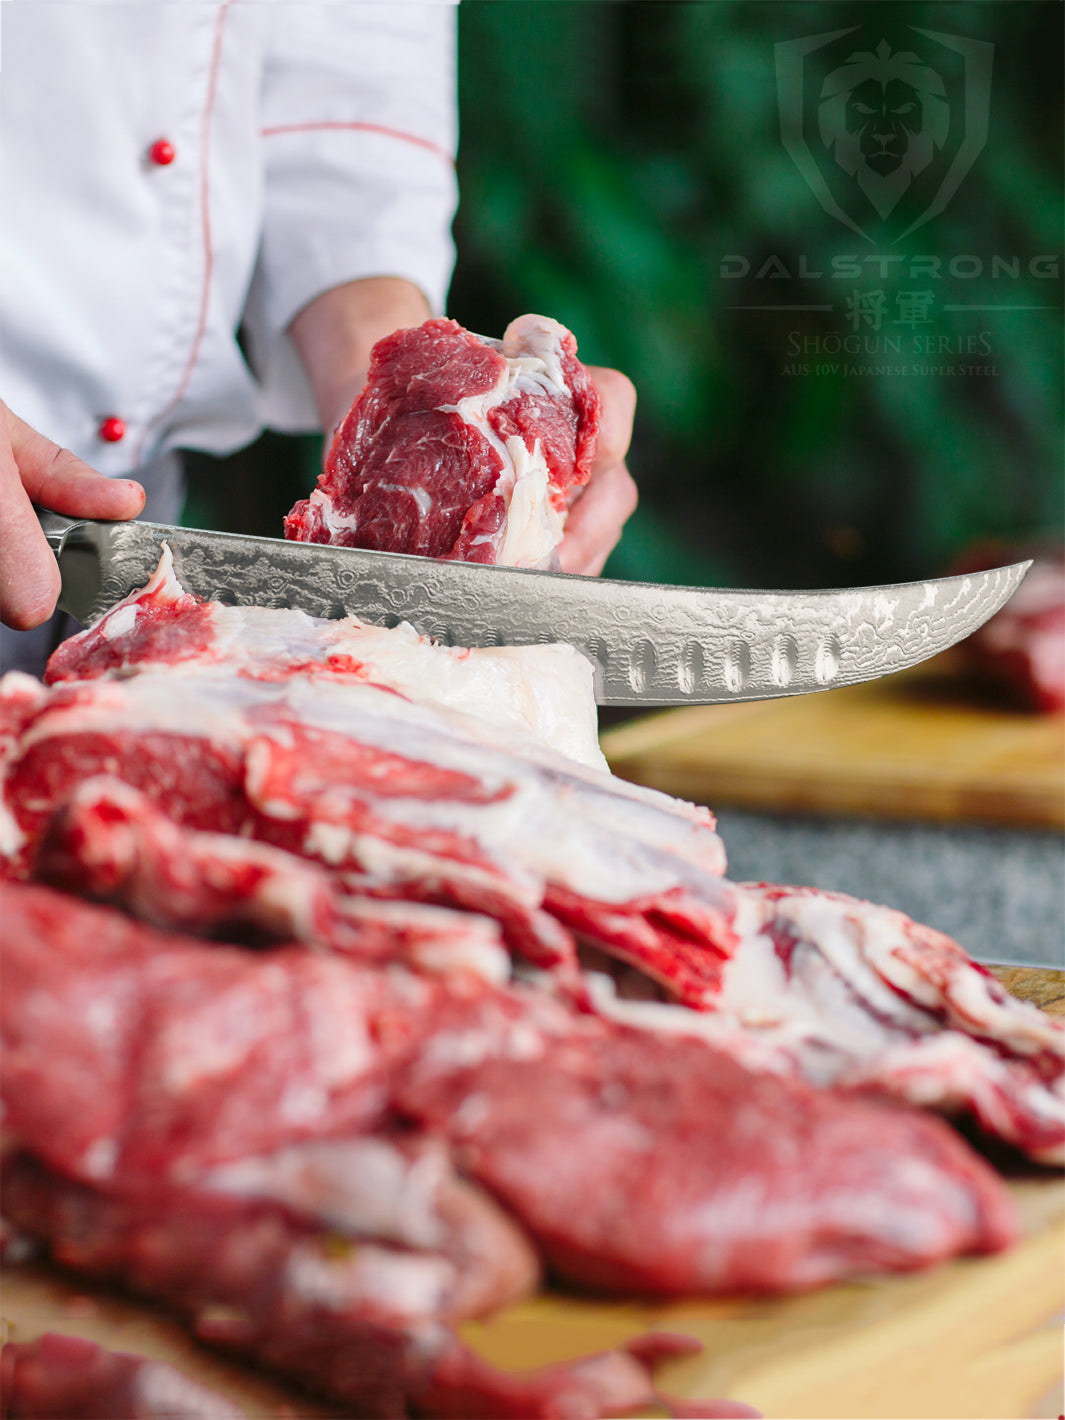 What is the Best Knife for Cutting Meat? – Dalstrong